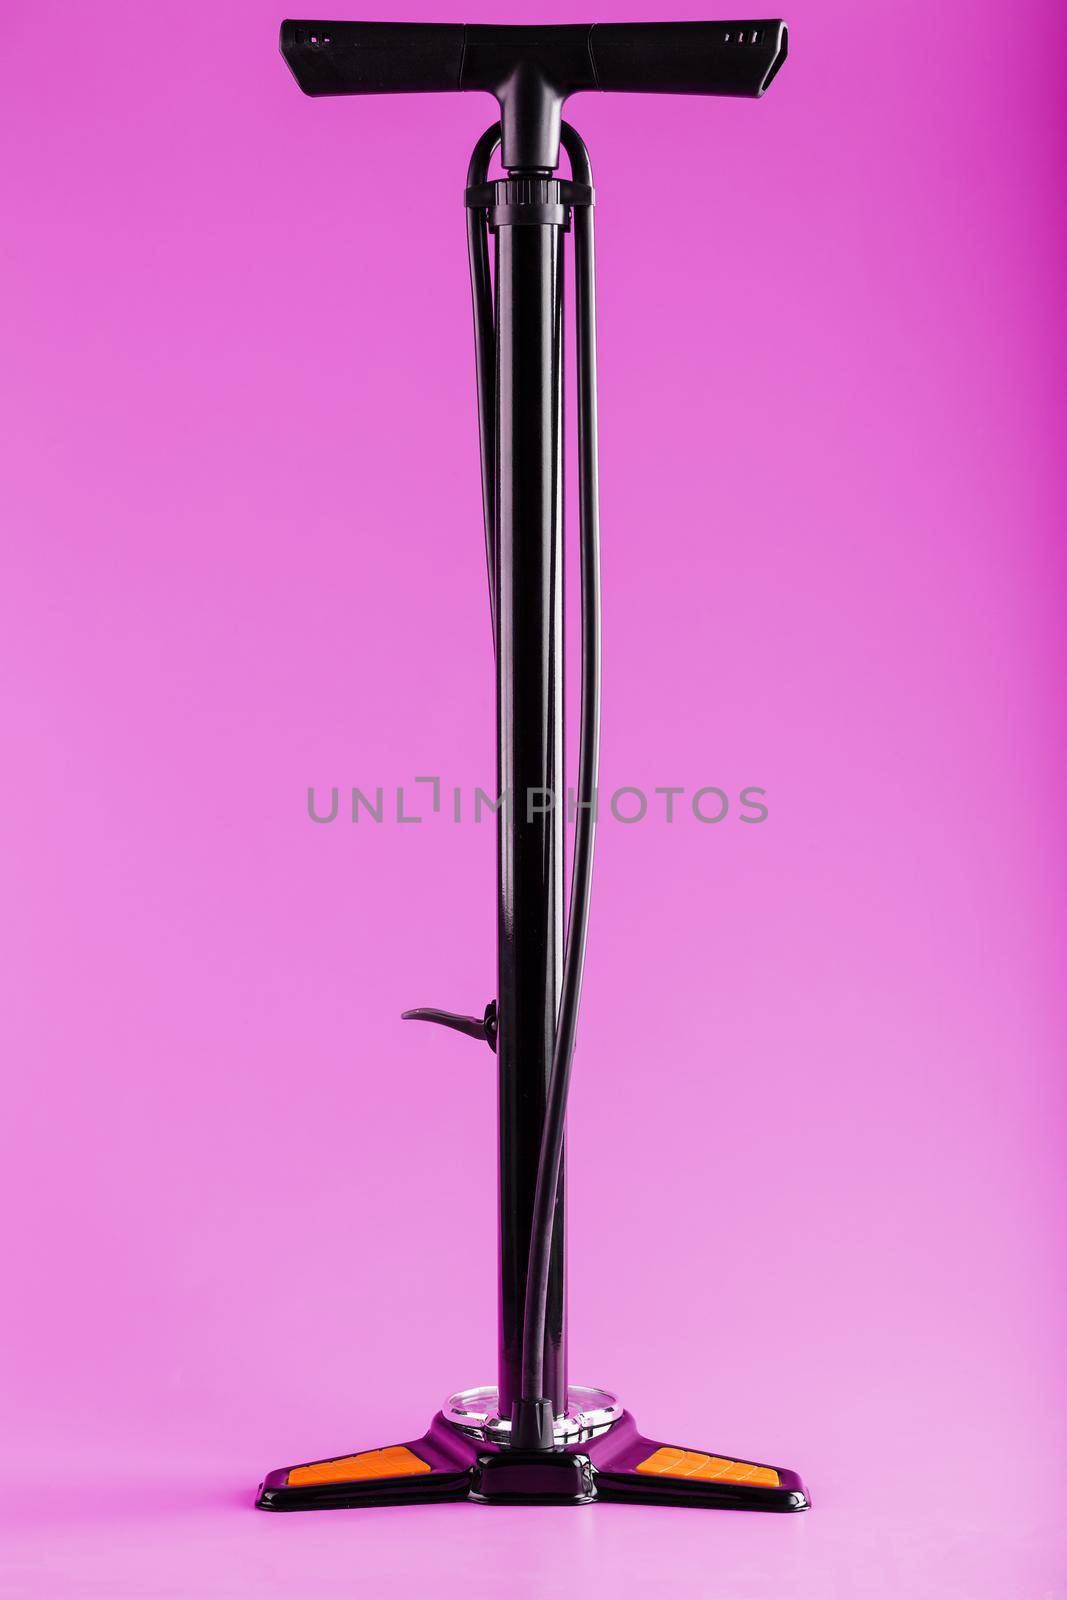 Black bicycle manual air pump for pumping wheels on a pink background by AlexGrec